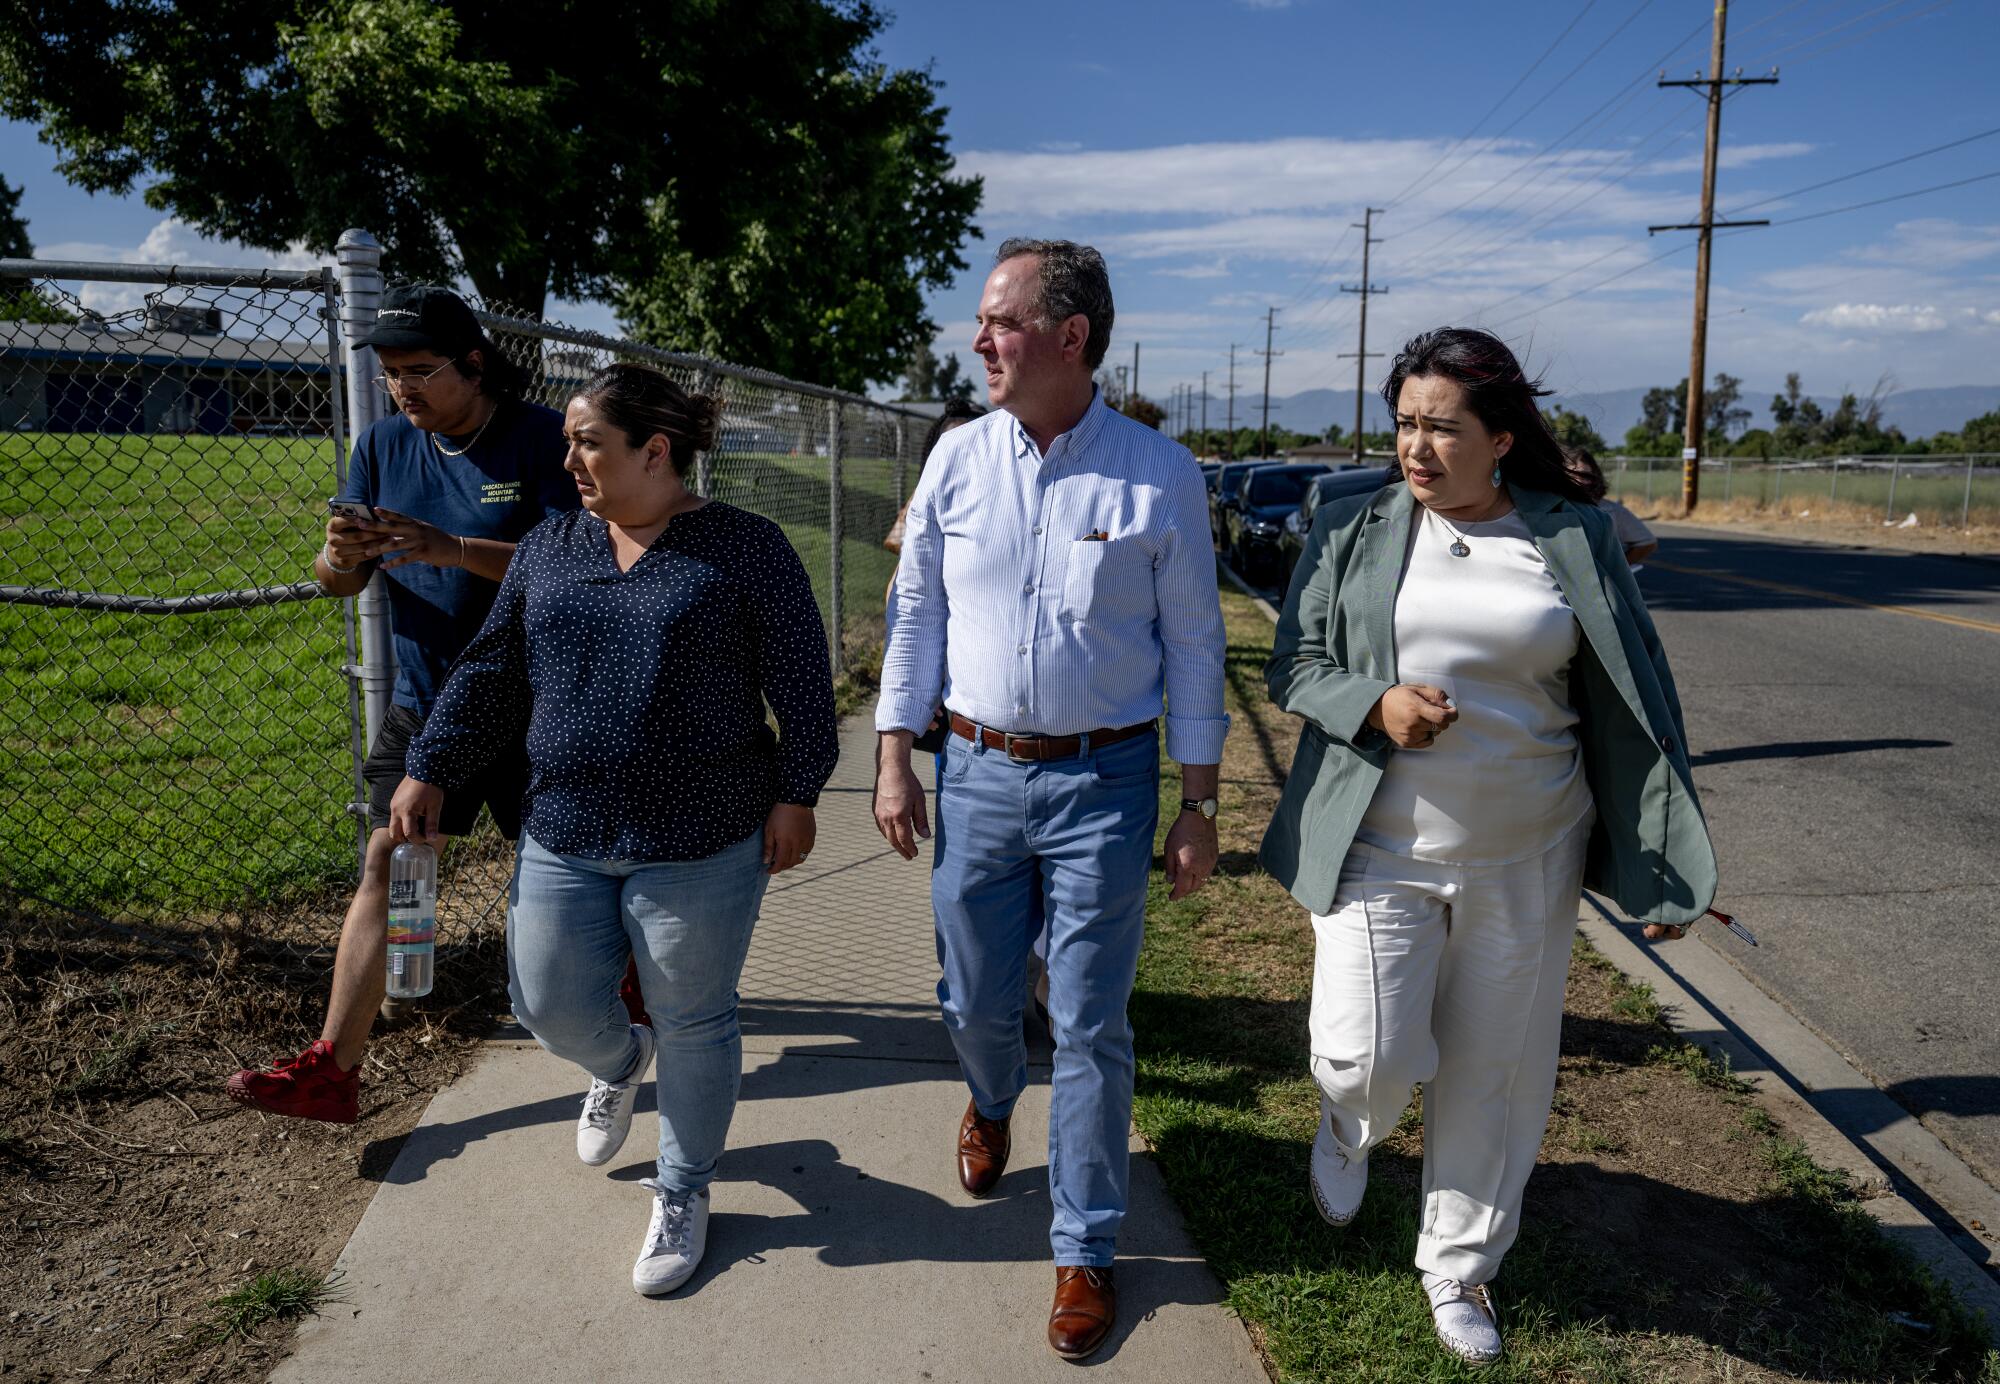  Congressman Adam Schiff, in jeans and a long-sleeved shirt, walks by a field with other people next to him